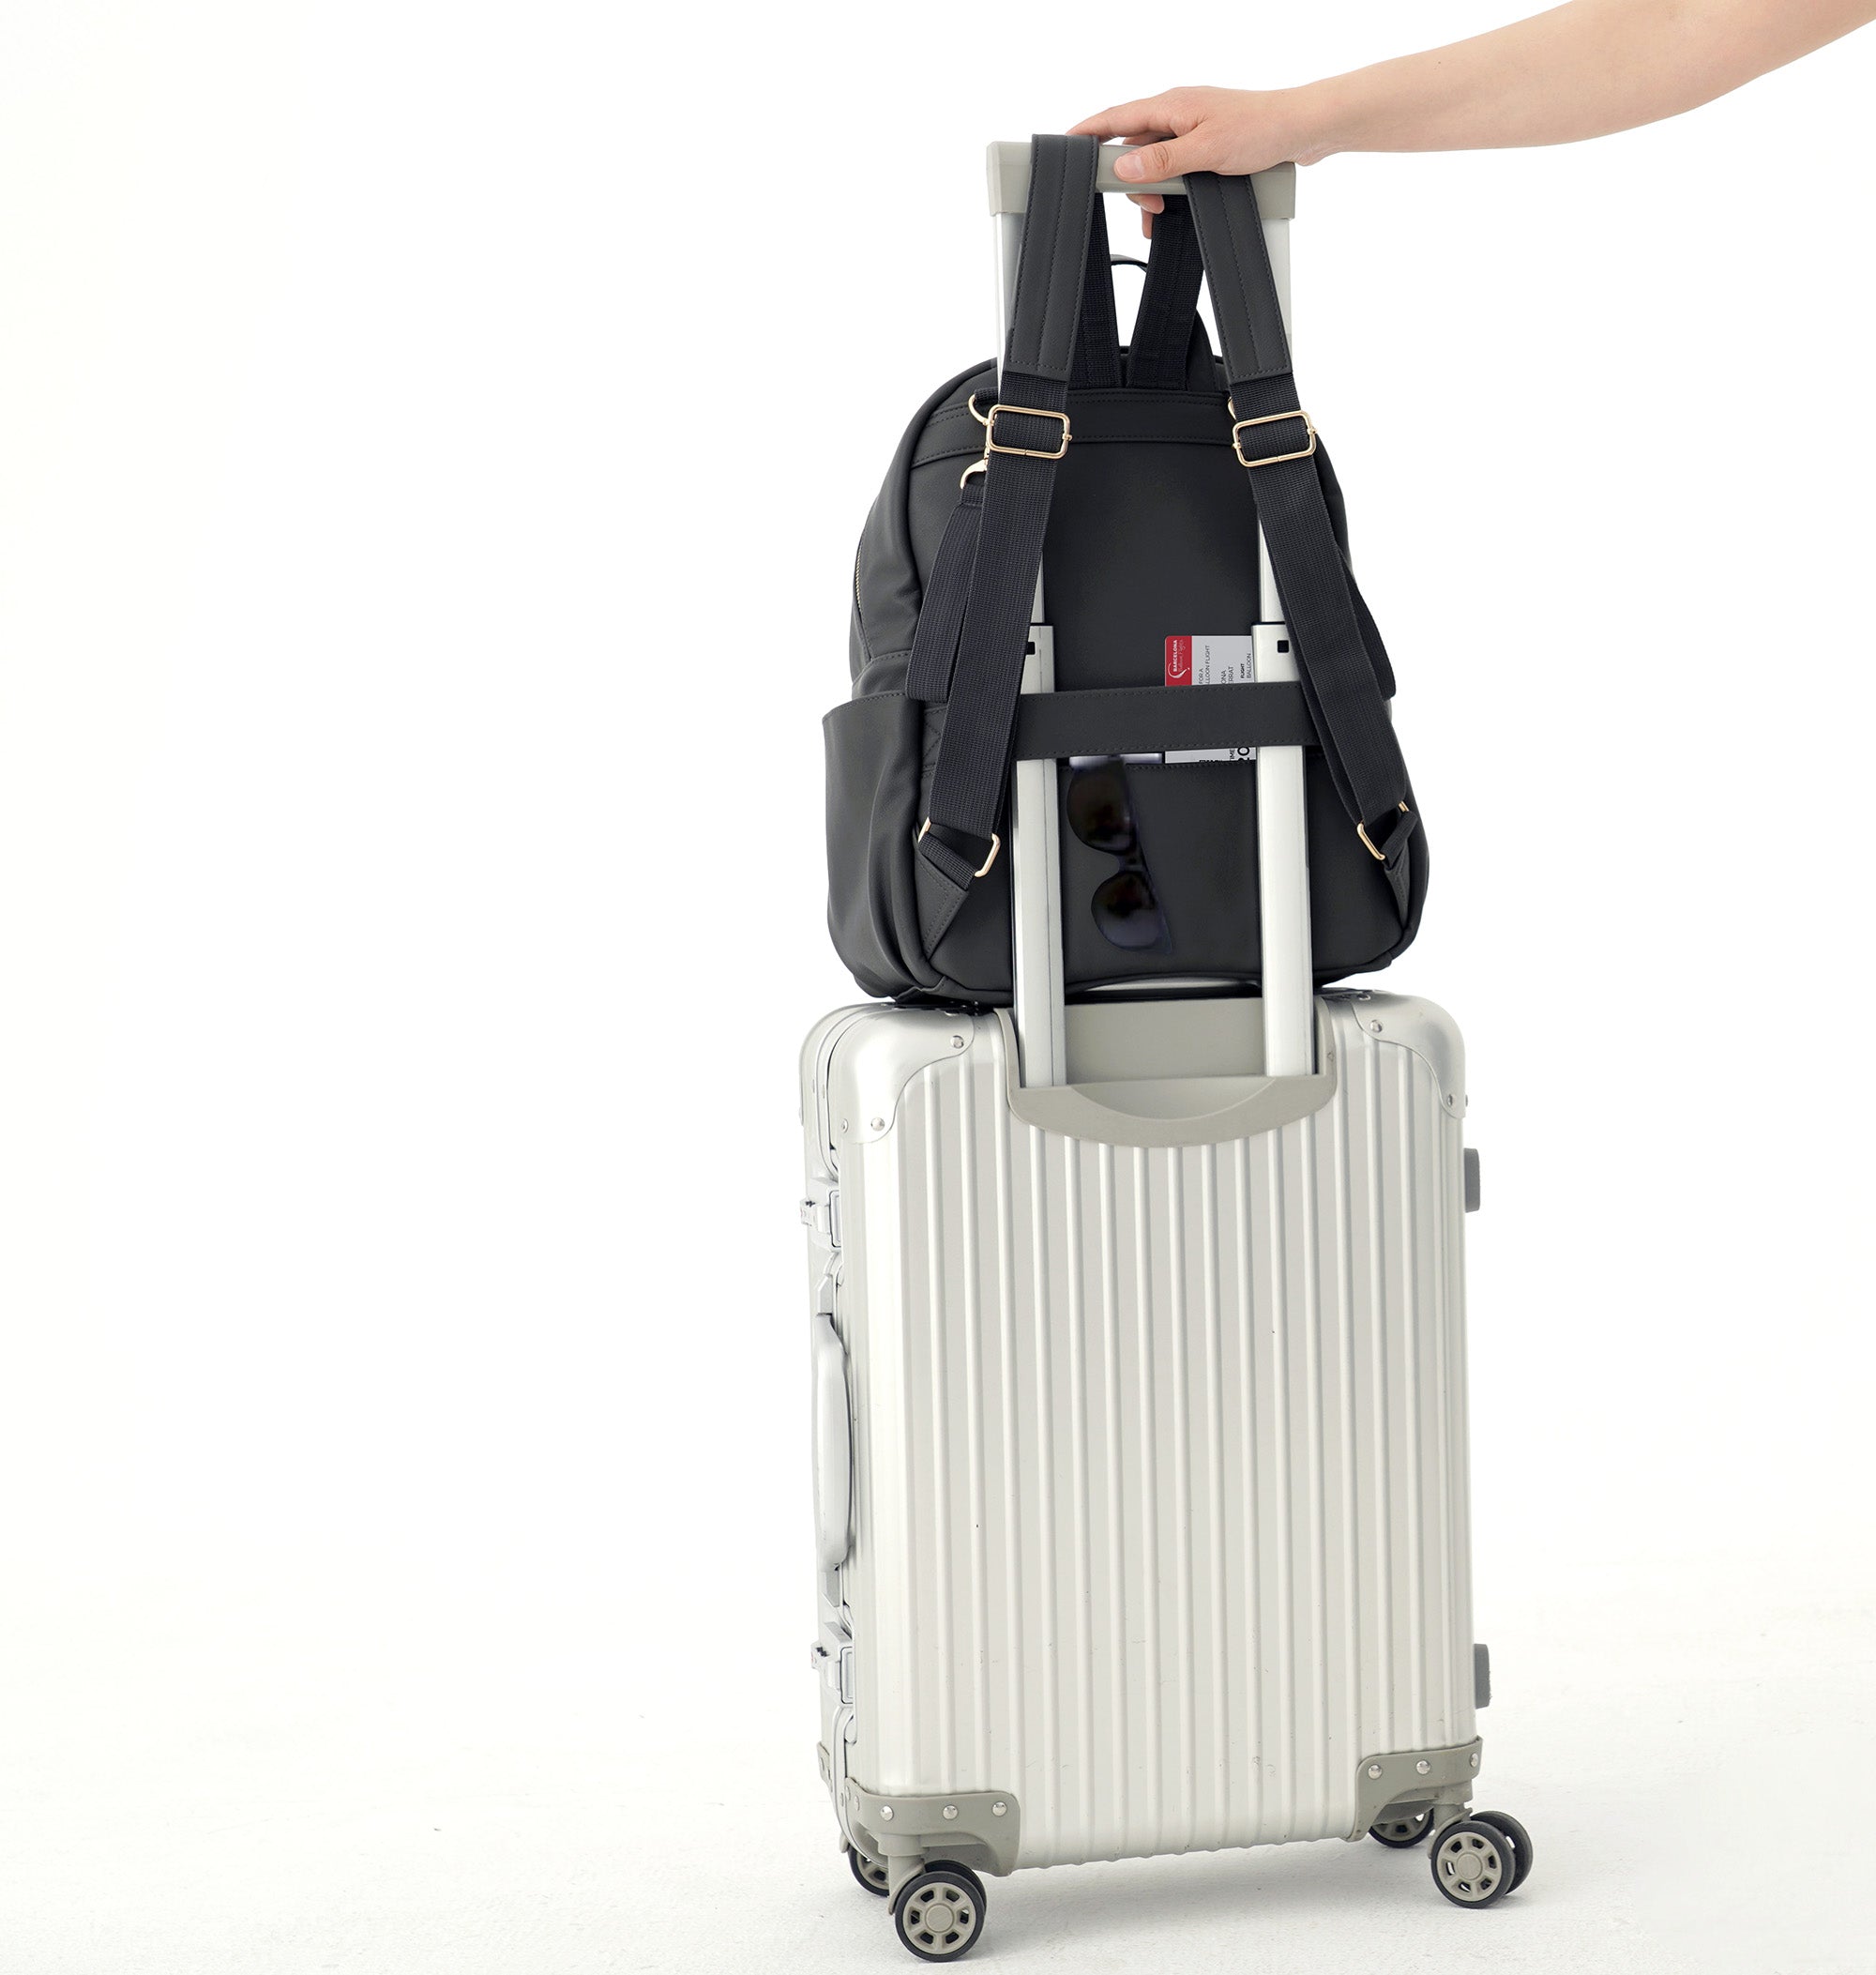 The Allis Backpack Changing Bag being effortlessly attached to a suitcase.